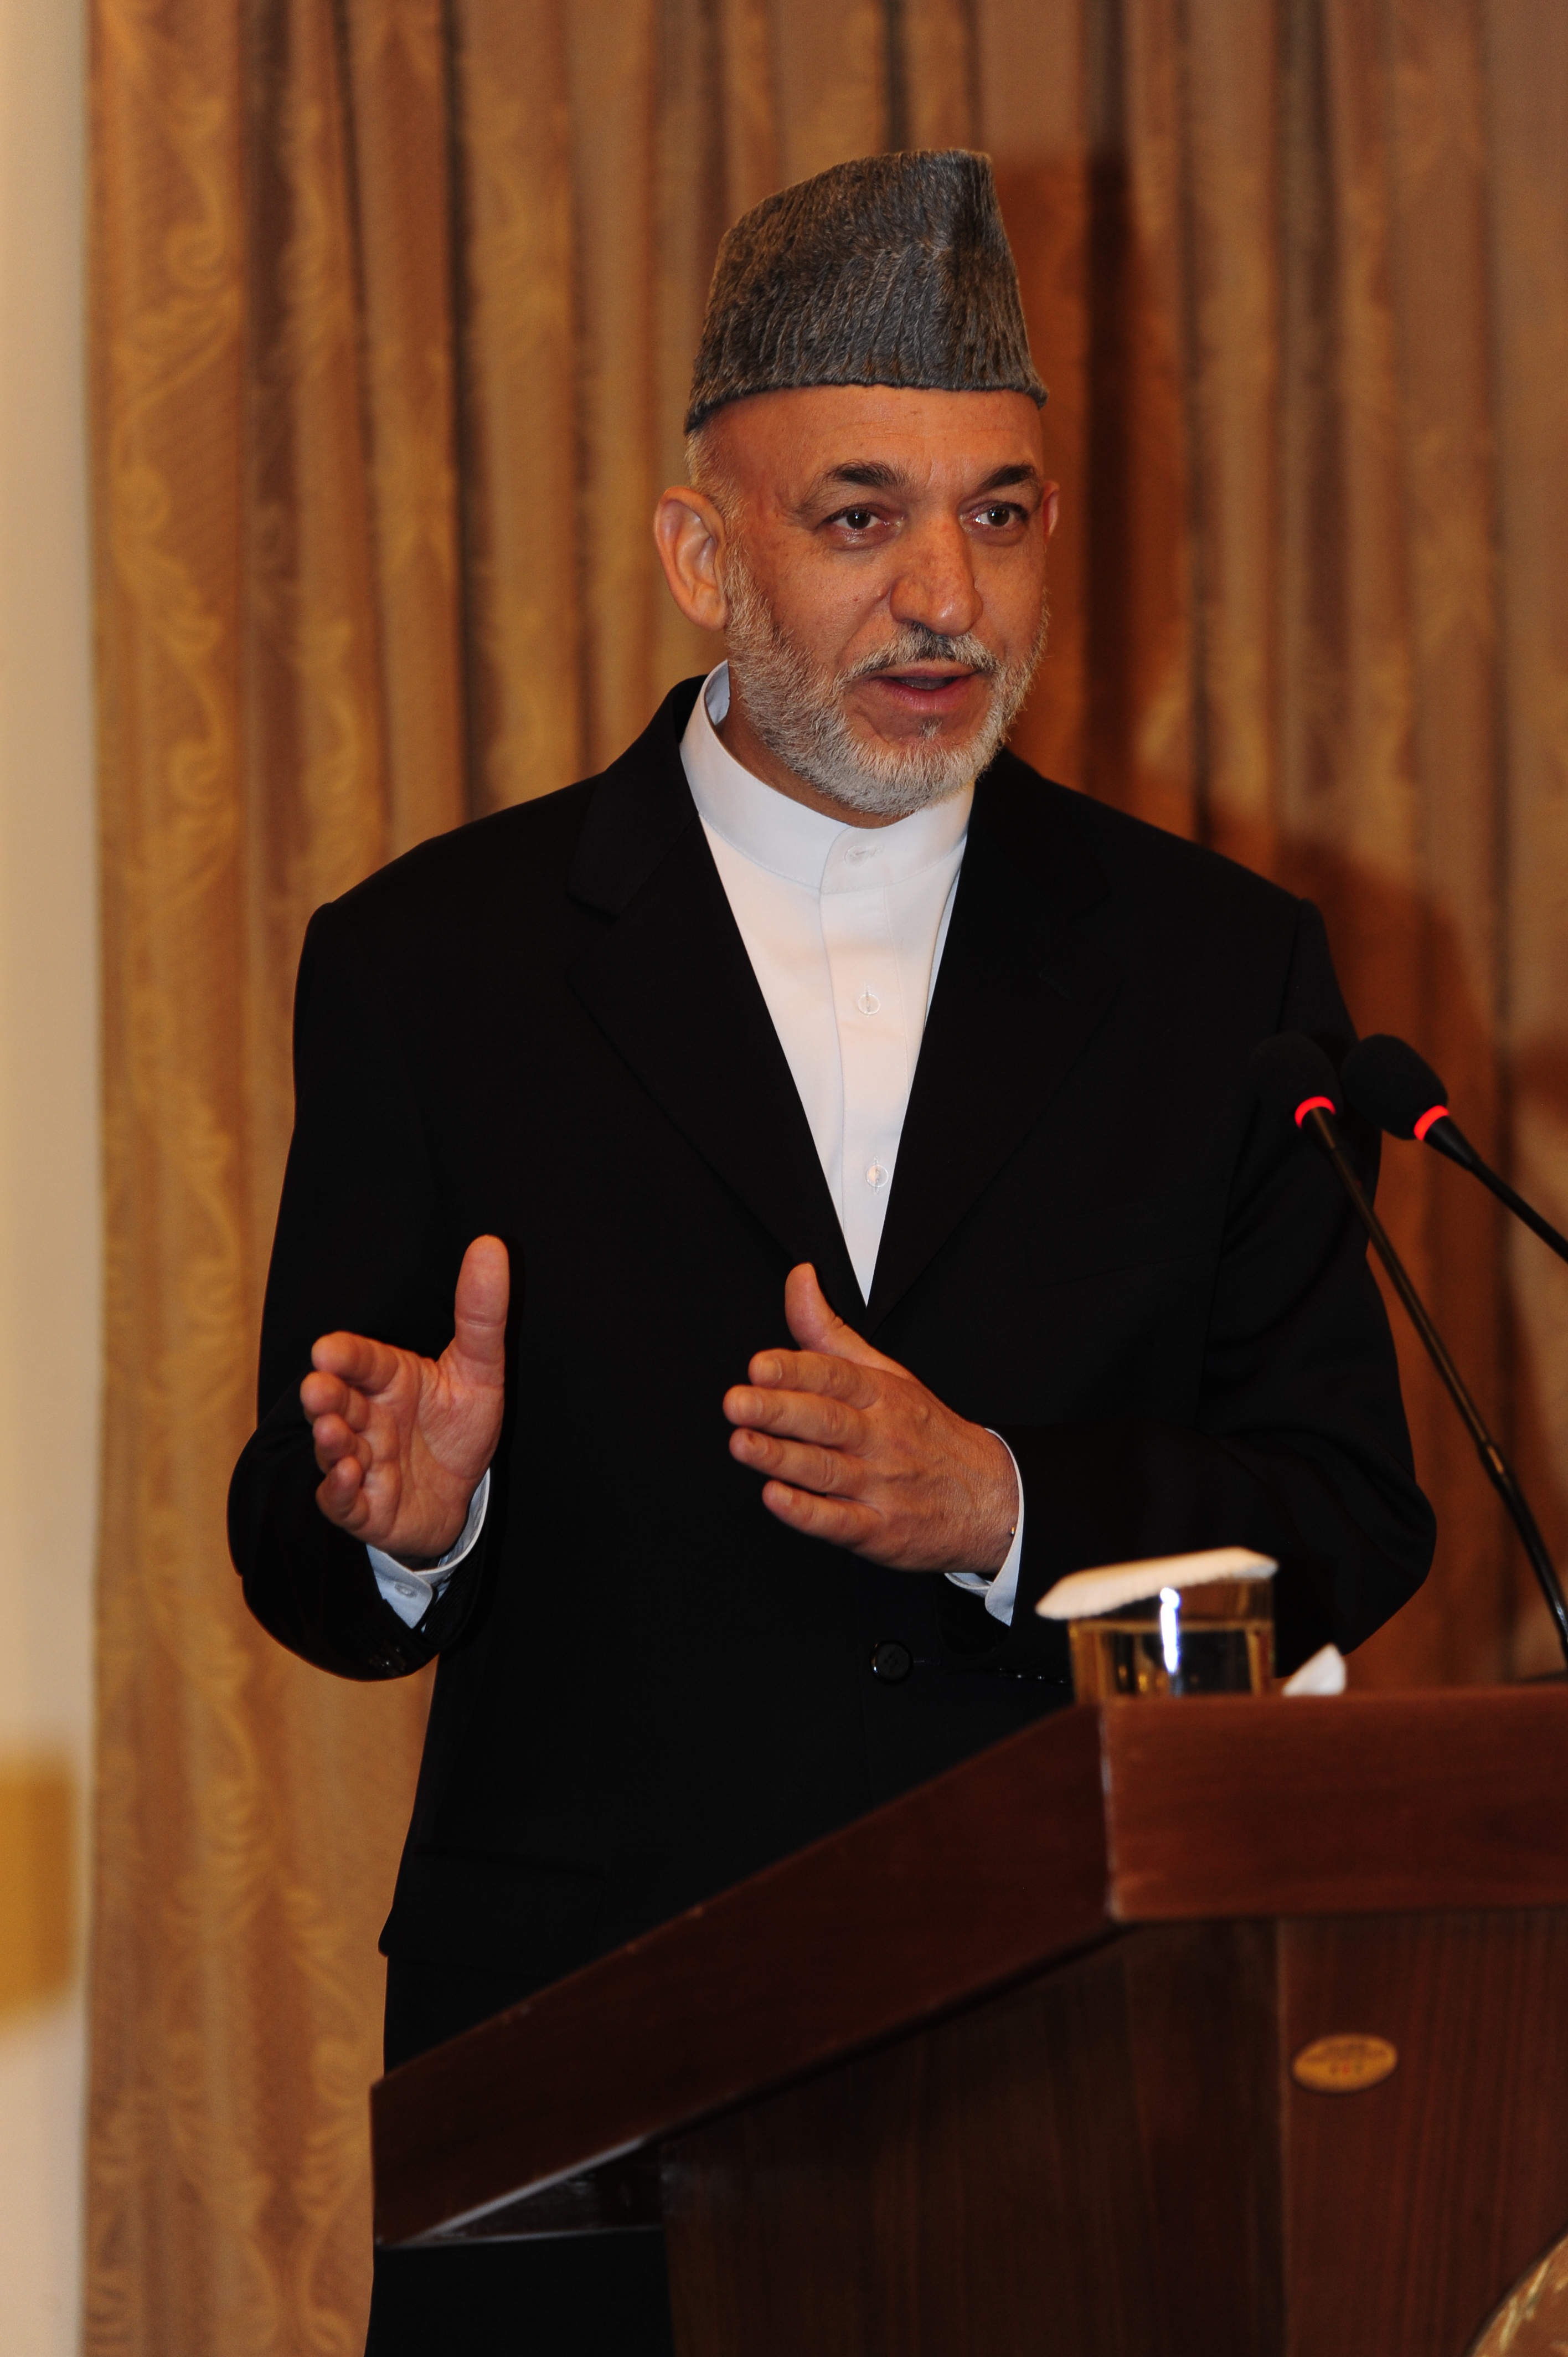 Karzai in August 2009